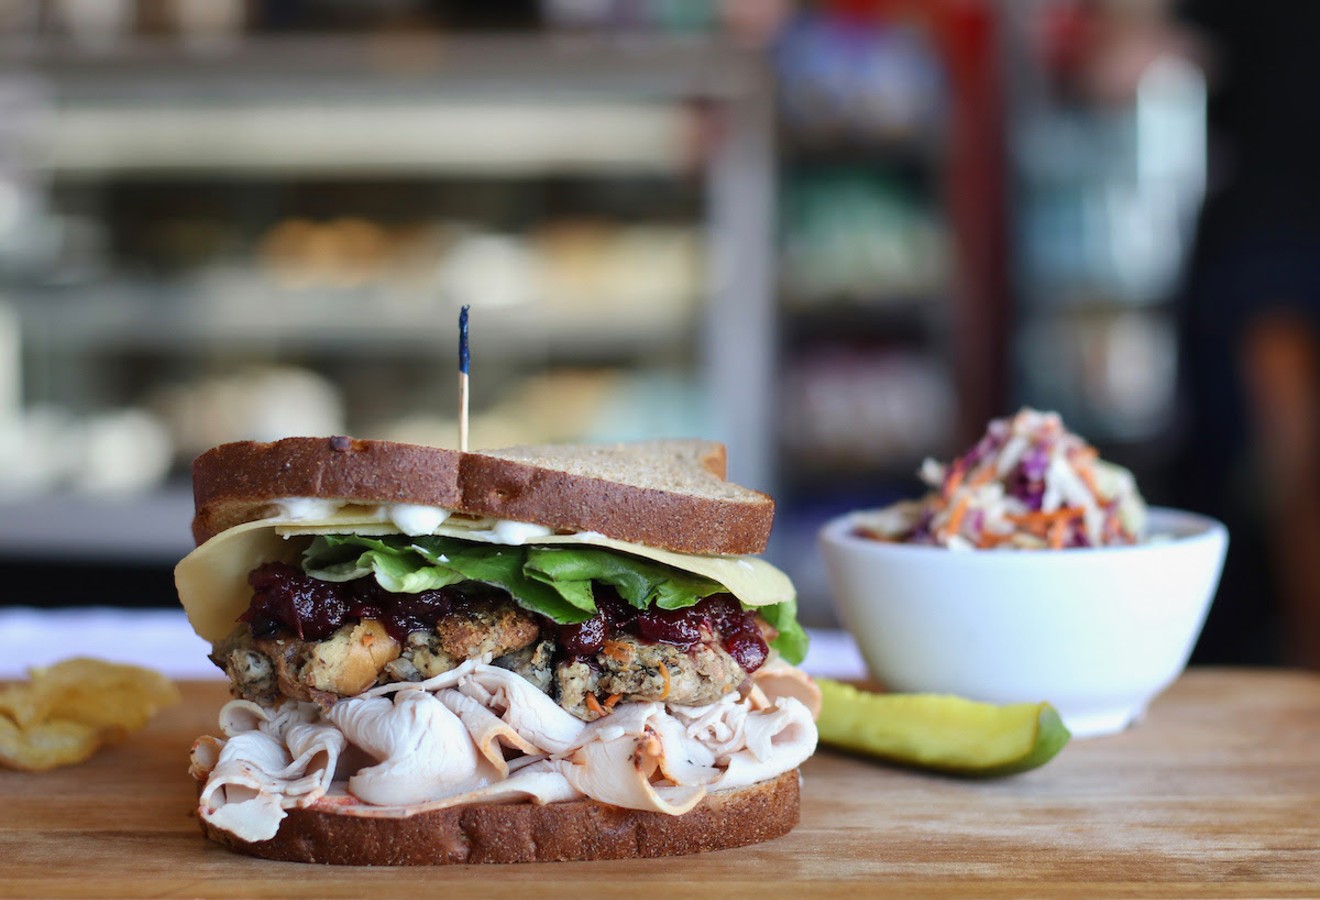 The Pilgrim is a year-round staple at Yampa Sandwich Co.